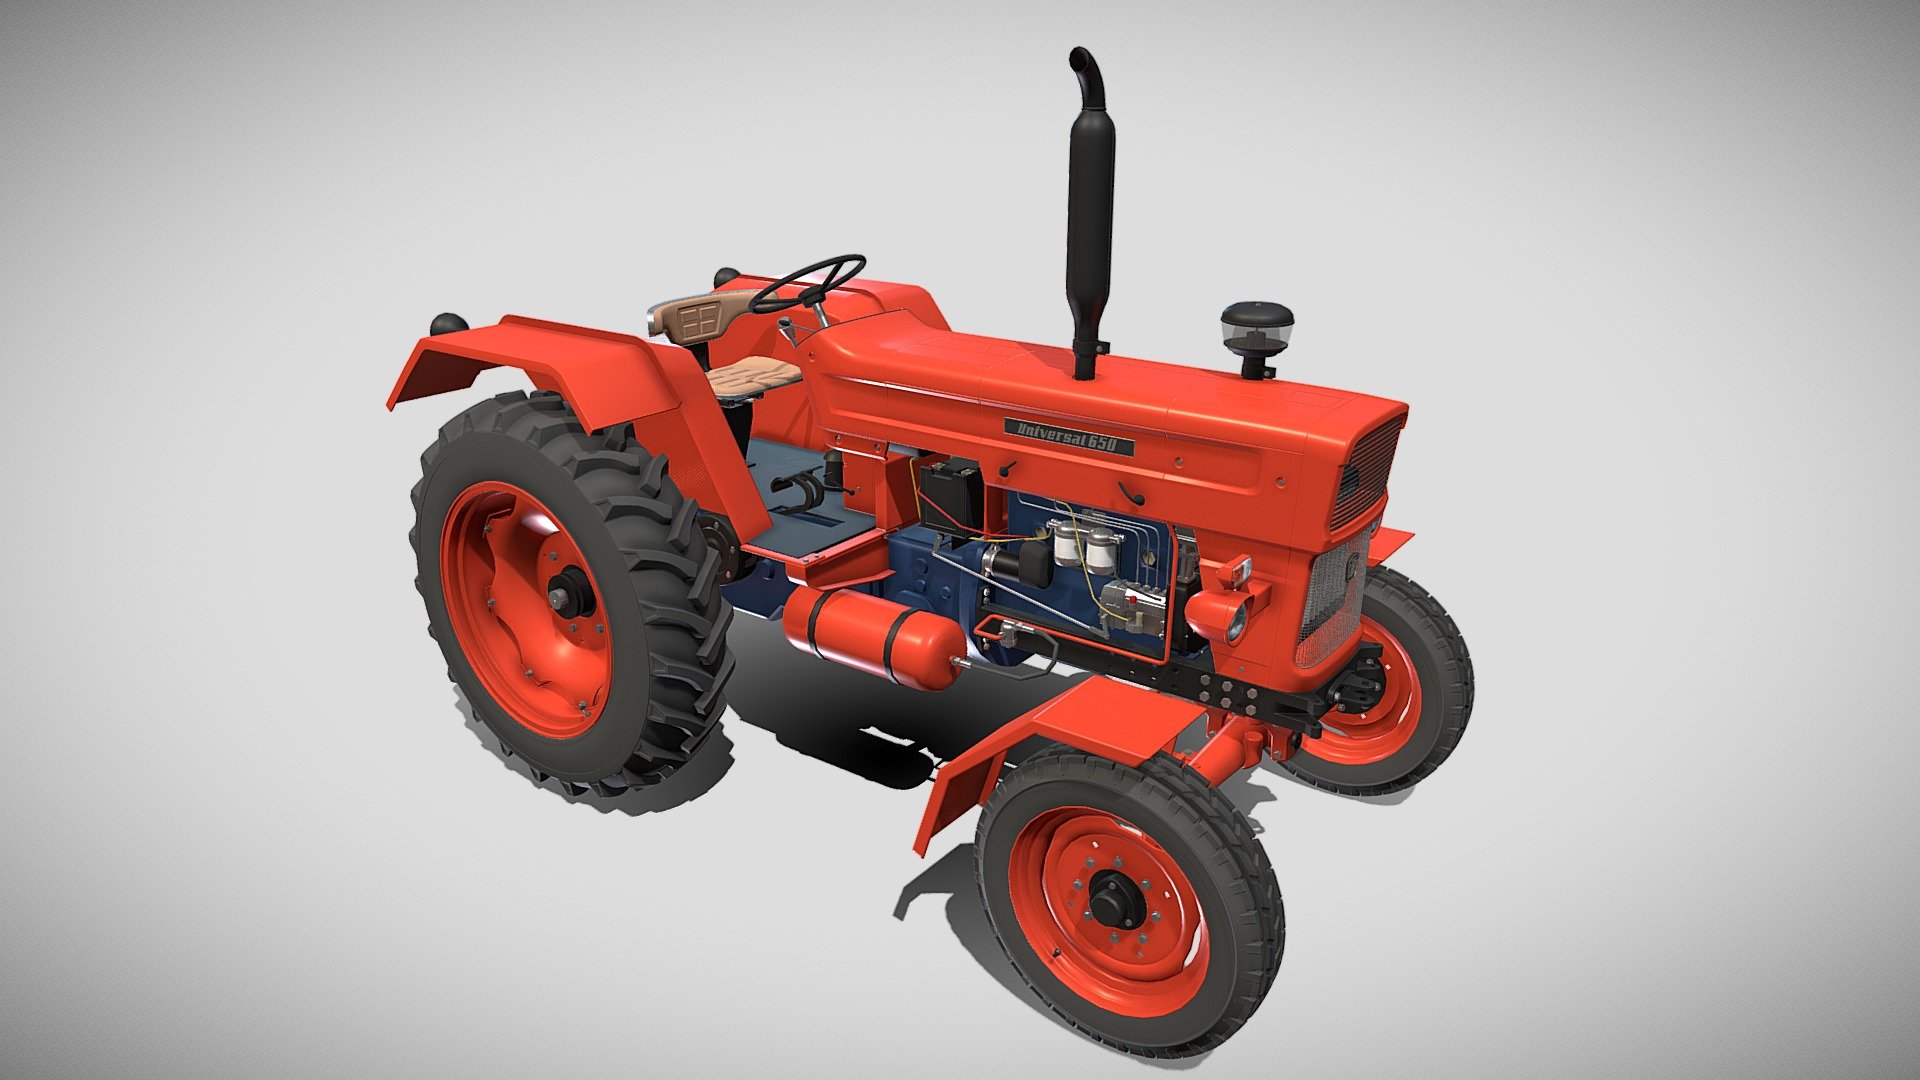 Highly detailed Tractor 3d model rendered with Cycles in Blender, as per seen on attached images.

The model is very intricately built, it has the transmission and engine, with cooling for oil and water, injection pump, fuel lines, compressed air circuit, electric circuit modeled. Some of these elements cannot be seen on the main renders, so I have also rendered the chassis in order to showcase them.

The 3d model is scaled to original size in Blender.

File formats:
-.blend, rendered with cycles, as seen in the images
-.obj, with materials applied
-.dae, with materials applied
-.fbx, with materials applied
-.stl
Files come named appropriately and split by file format.

3D Software:

The 3D model was originally created in Blender 2.8 and rendered with Cycles.

Materials and textures:

The models have materials applied in all formats, and are ready to import and render, note that some minimal adjustments might be needed to look best in the renderer of choice.

The models come with one png texture 3d model